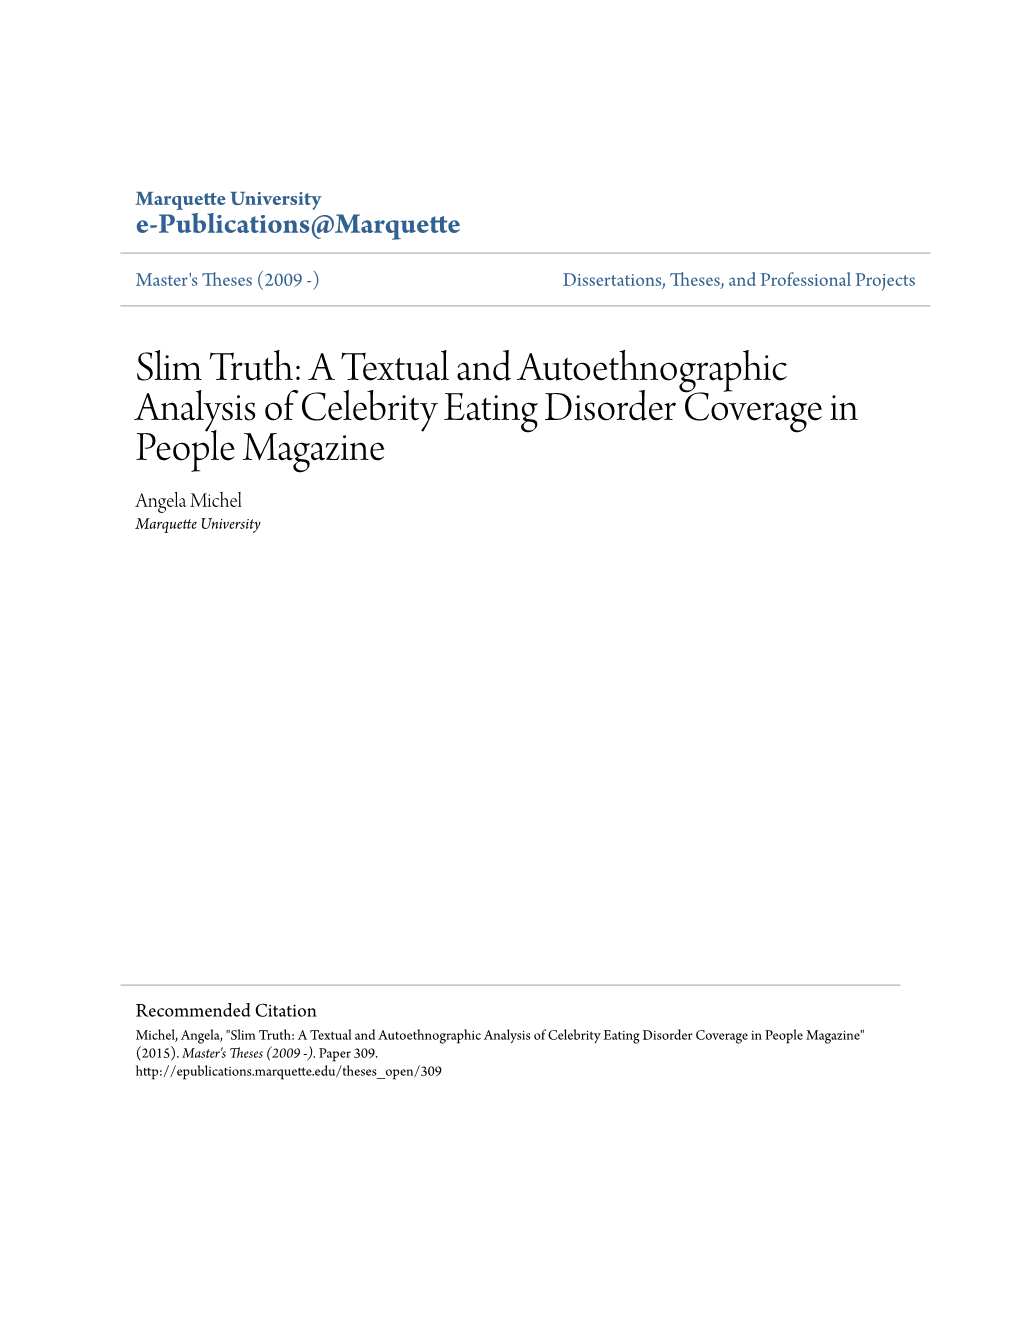 A Textual and Autoethnographic Analysis of Celebrity Eating Disorder Coverage in People Magazine Angela Michel Marquette University